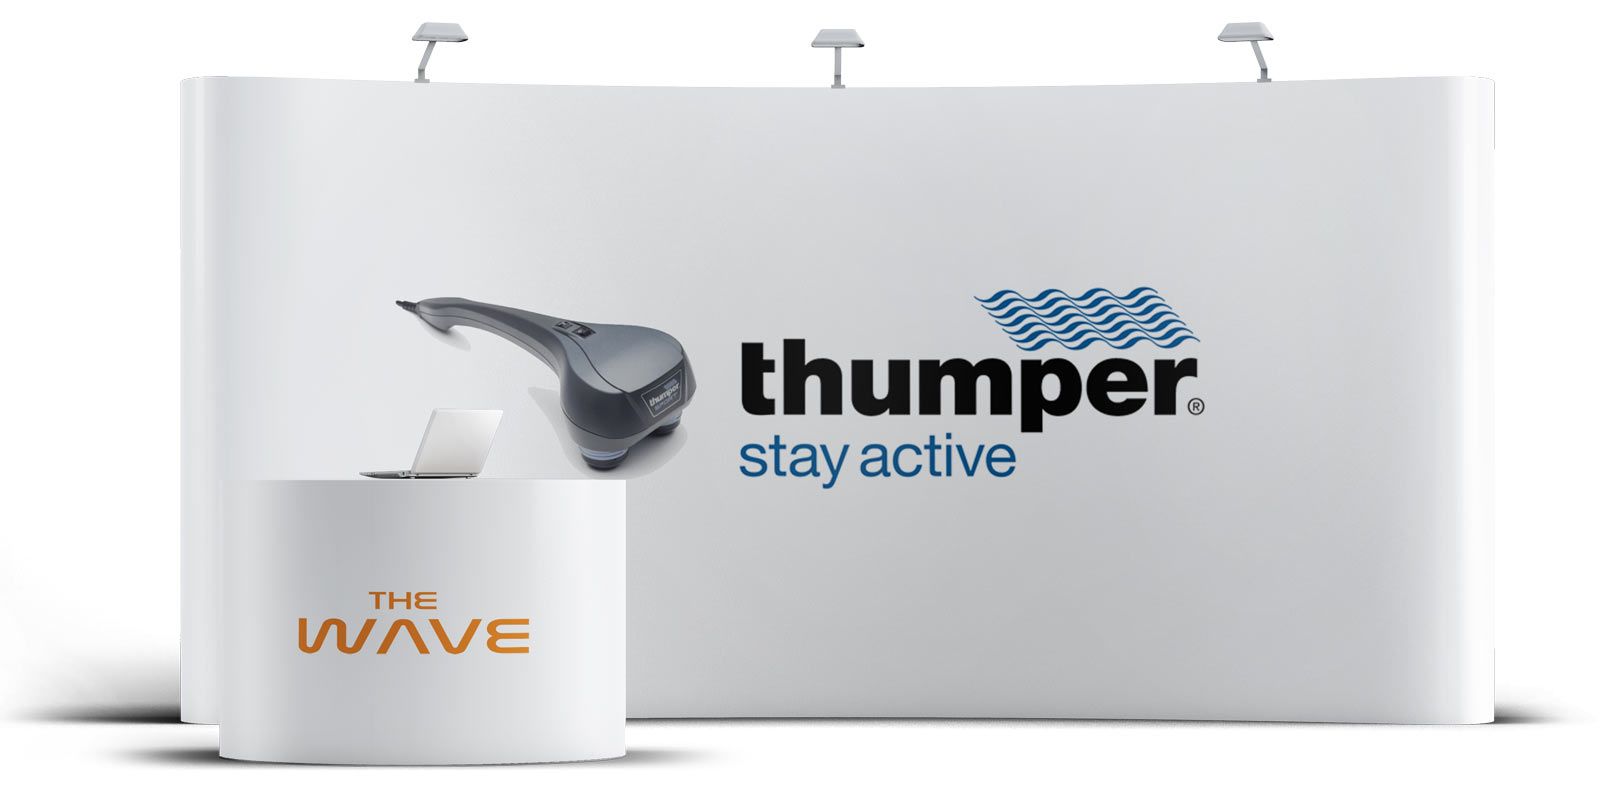 Thumper - Exhibitor at The WAVE Chiropractic Conference